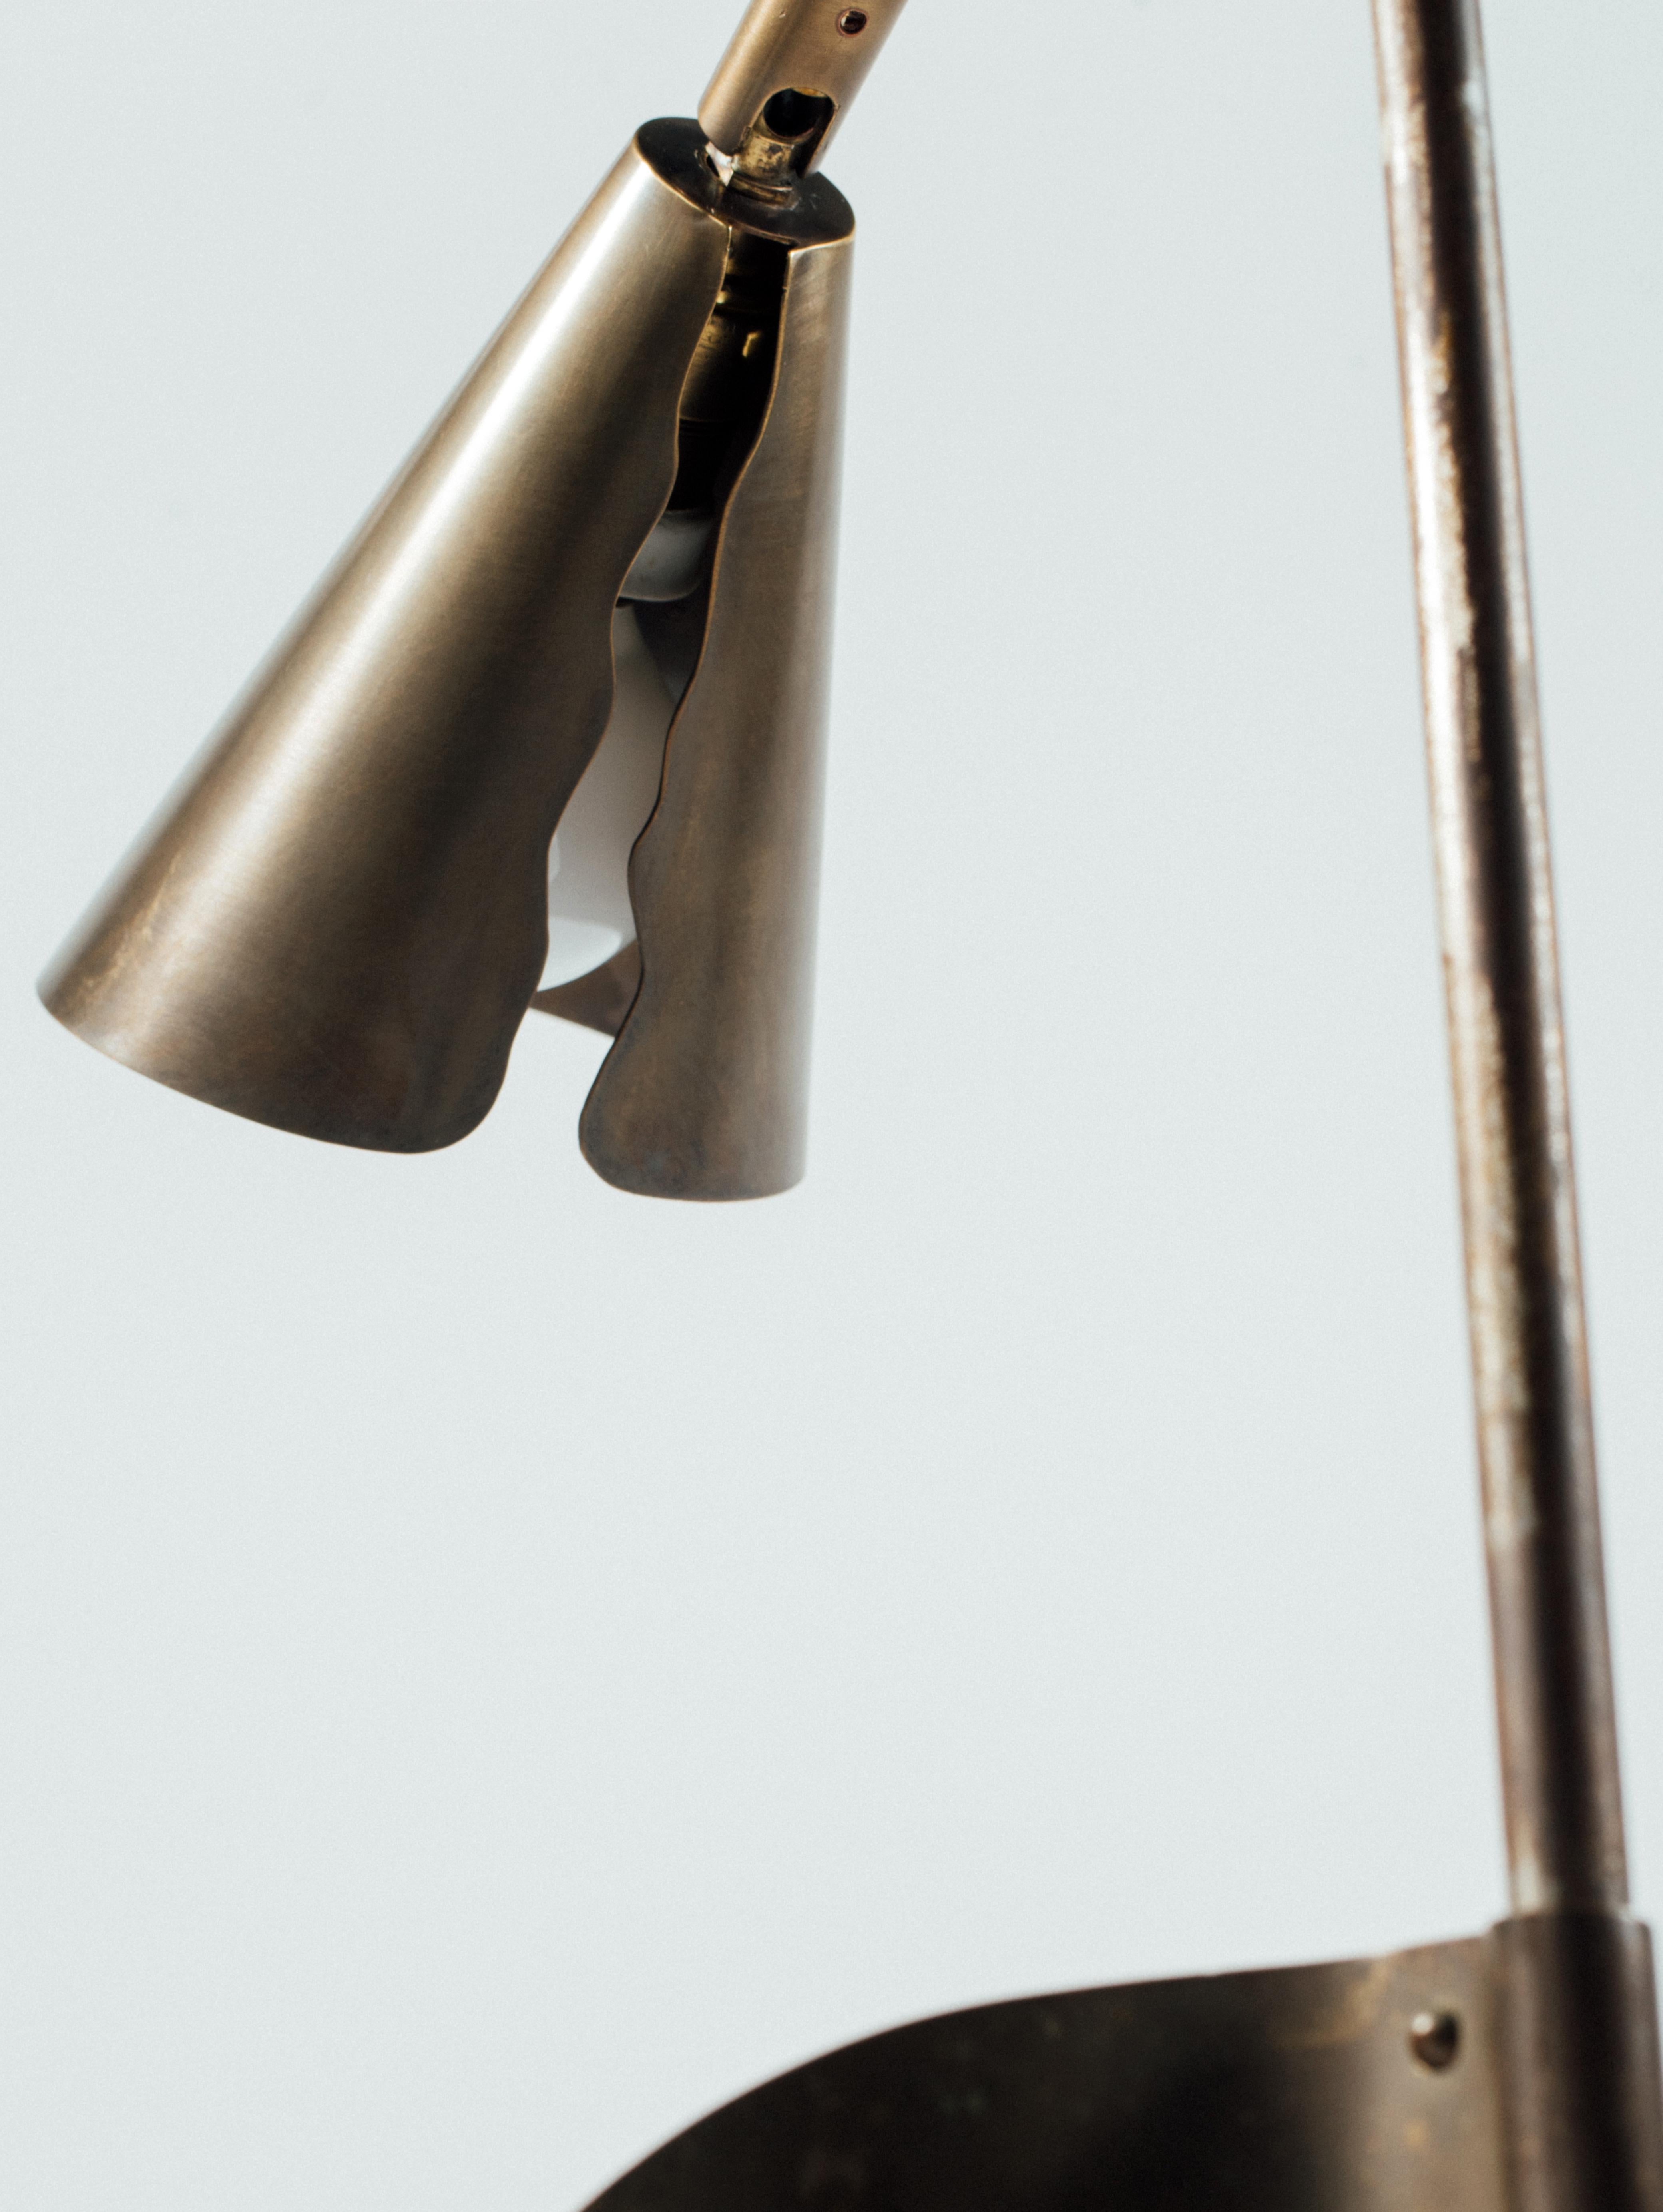 Modern Rare Desk Lamp in Patinated Brass and Steel, Netherlands, circa 1975